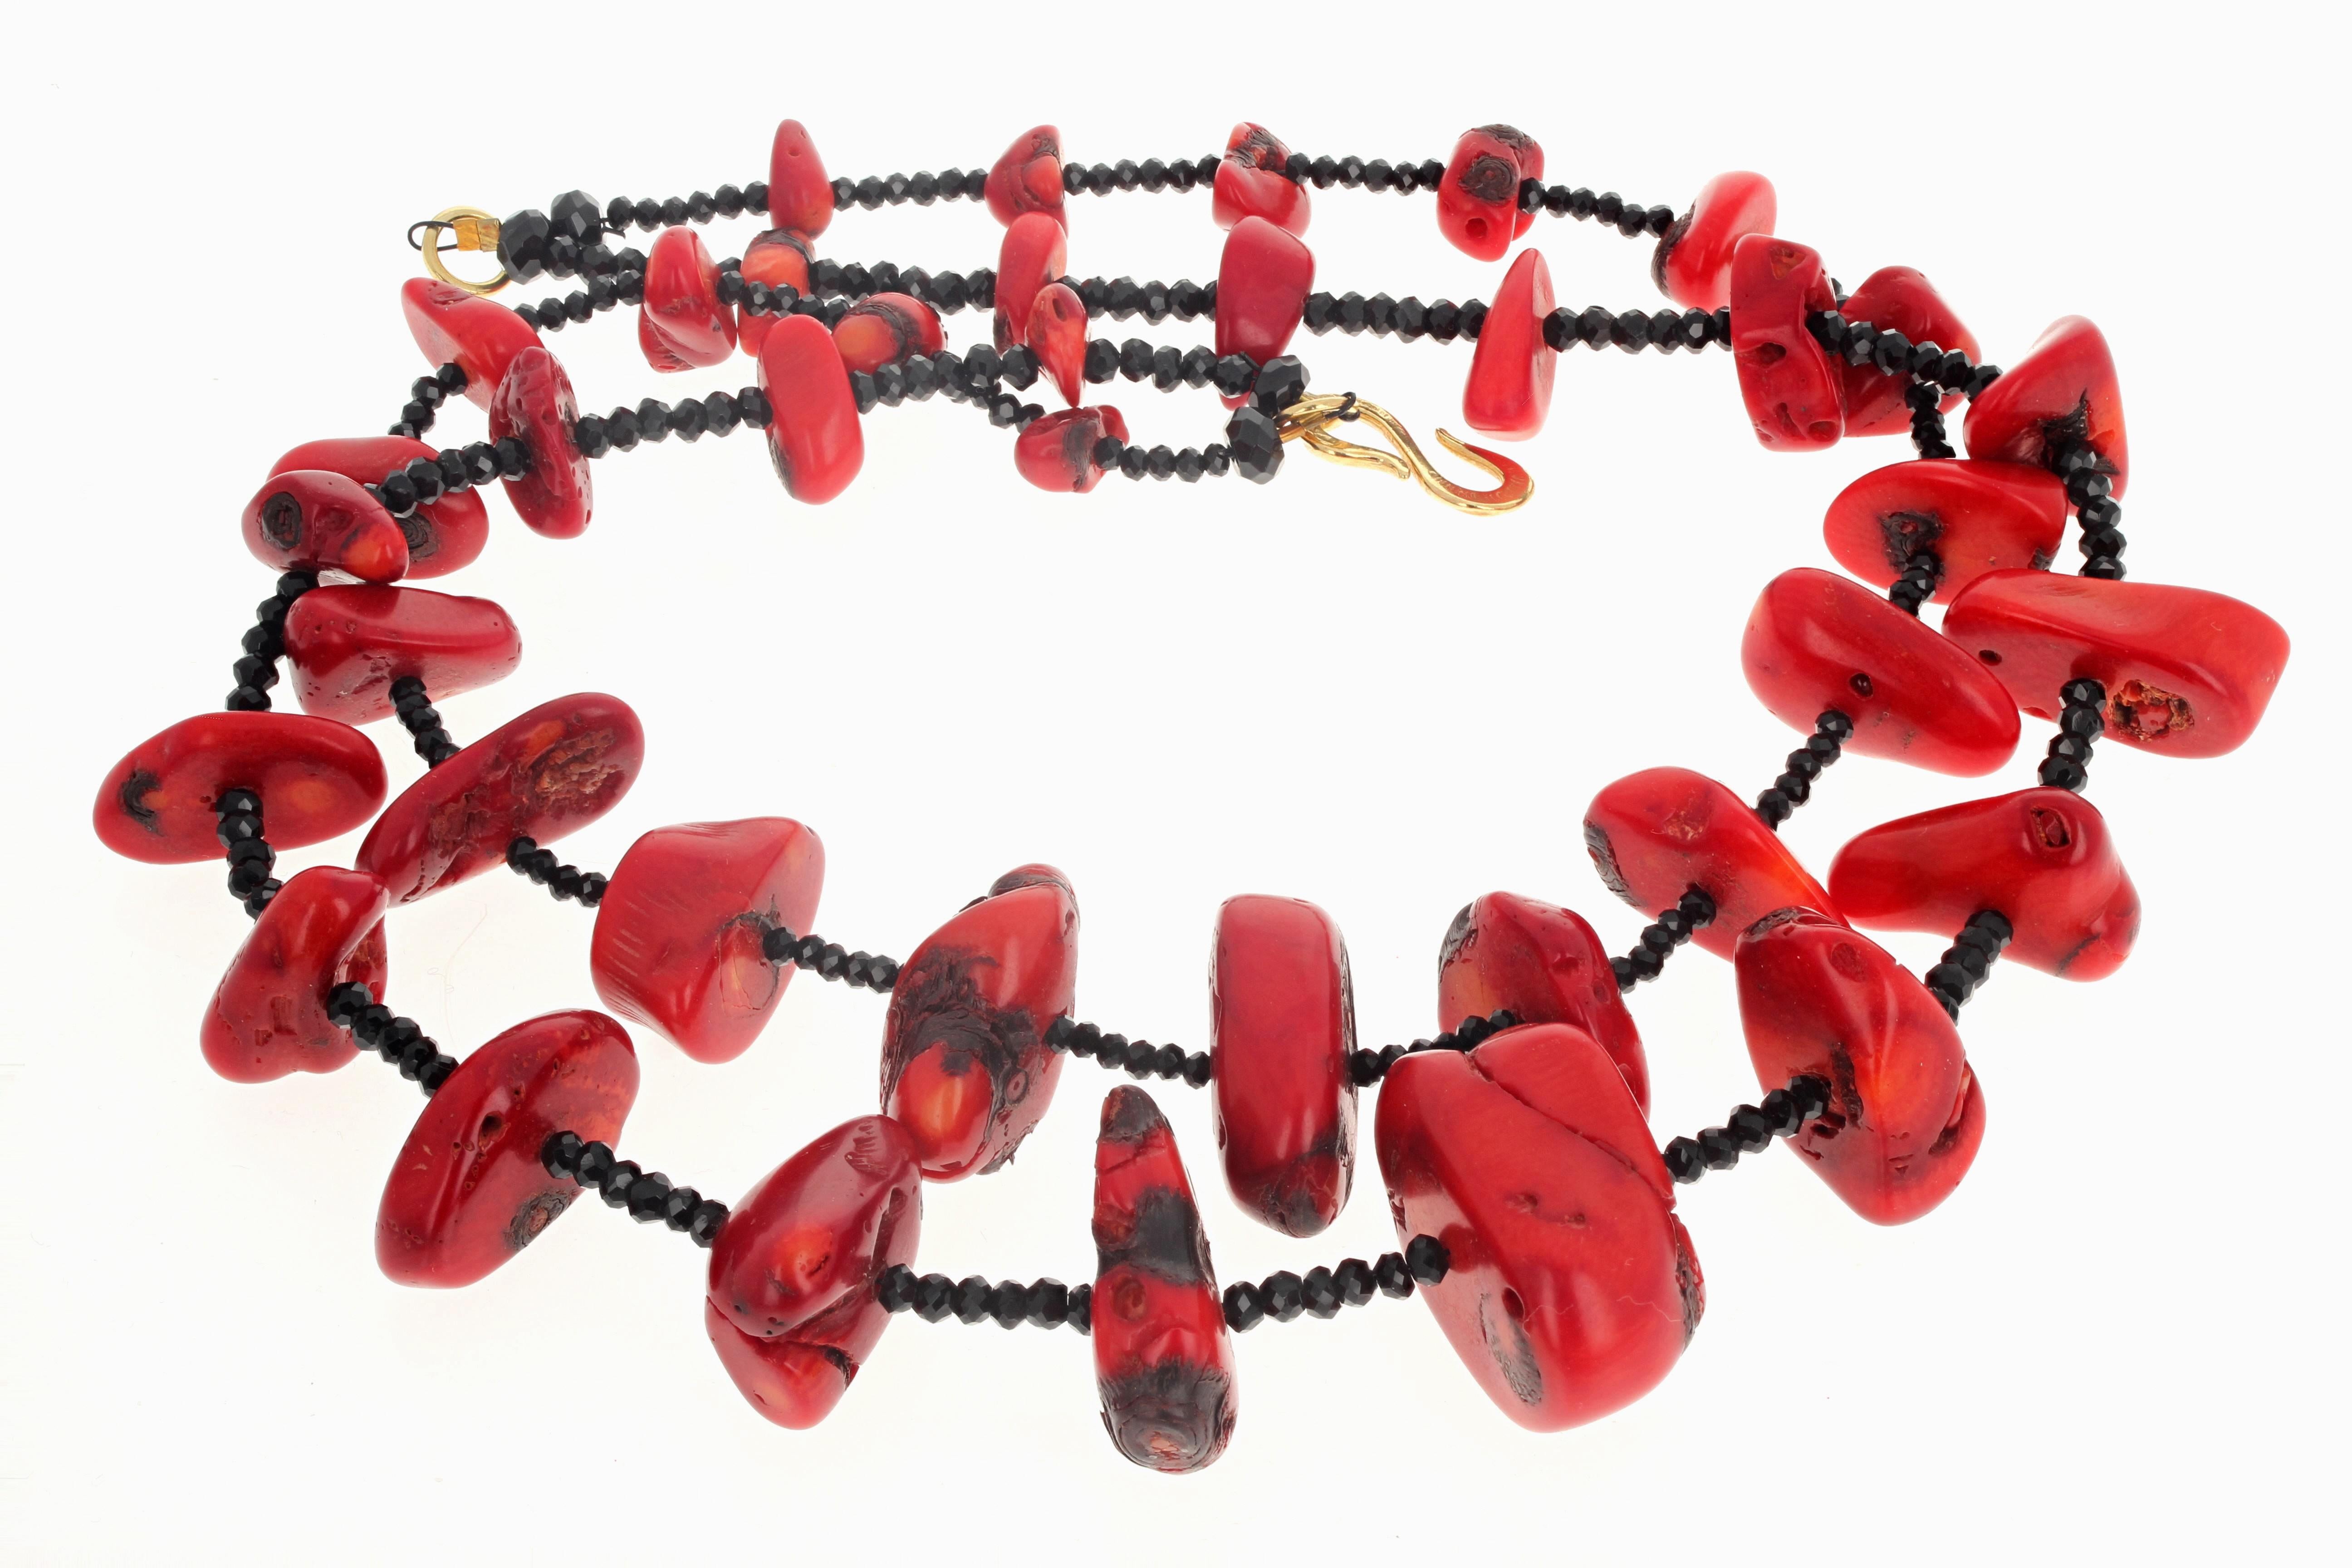 real coral beads for sale